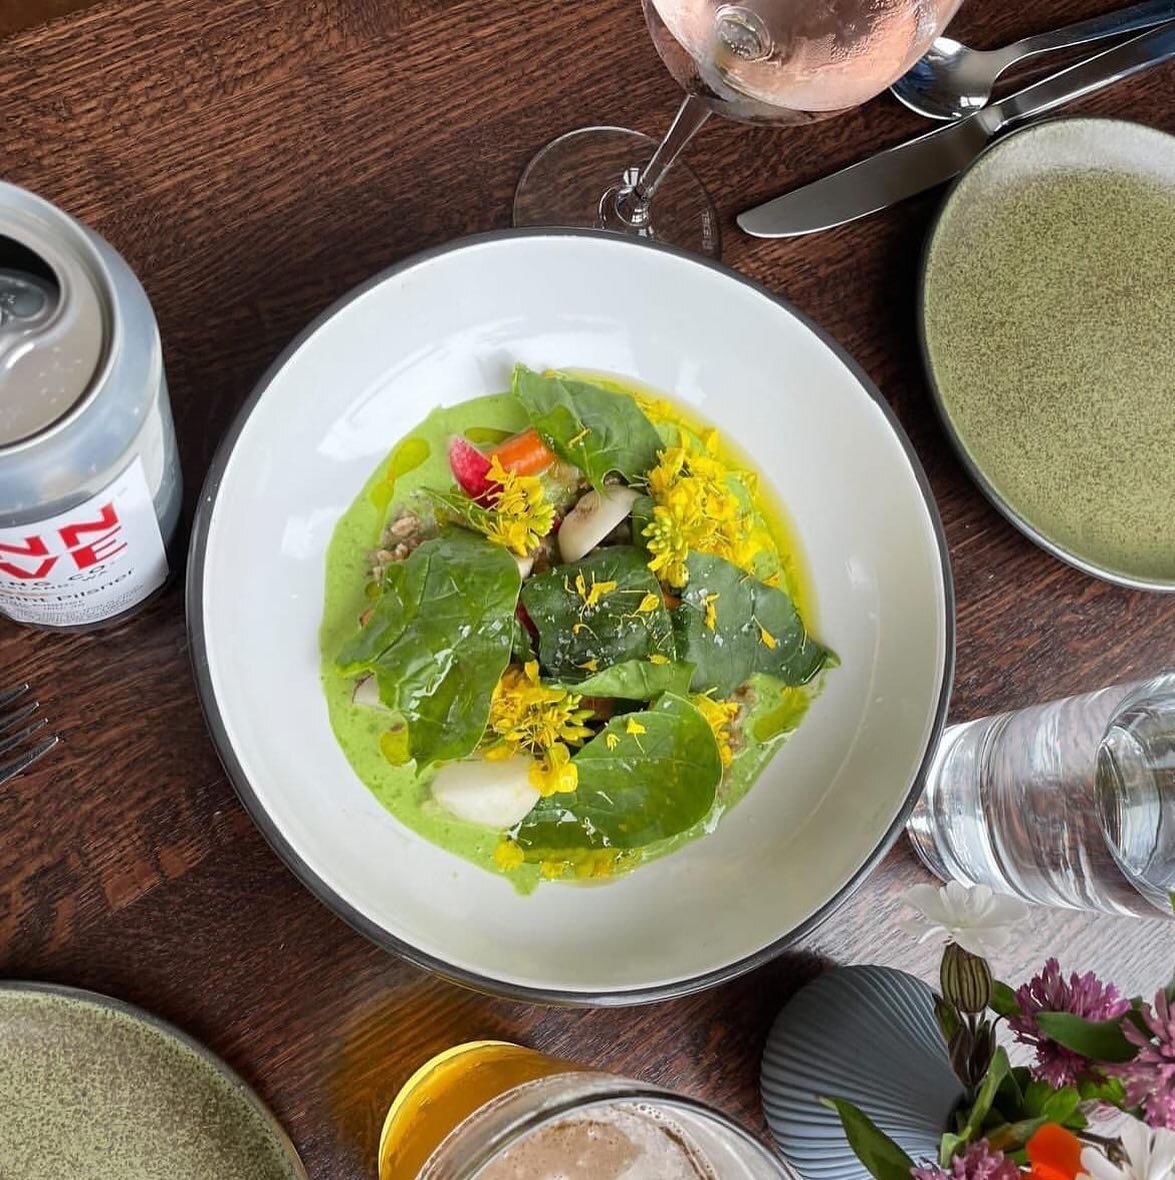 Colors of Summer 🌿 Farro and spring vegetable salad with green garlic bisque, herb buttermilk sauce, spinach and brined spring vegetables. 🌷 by @foggyhillfarm  #simplygoodfood 

📷: @takakasuga #asfreshasitgets #summerproduce #summertime #theoyster